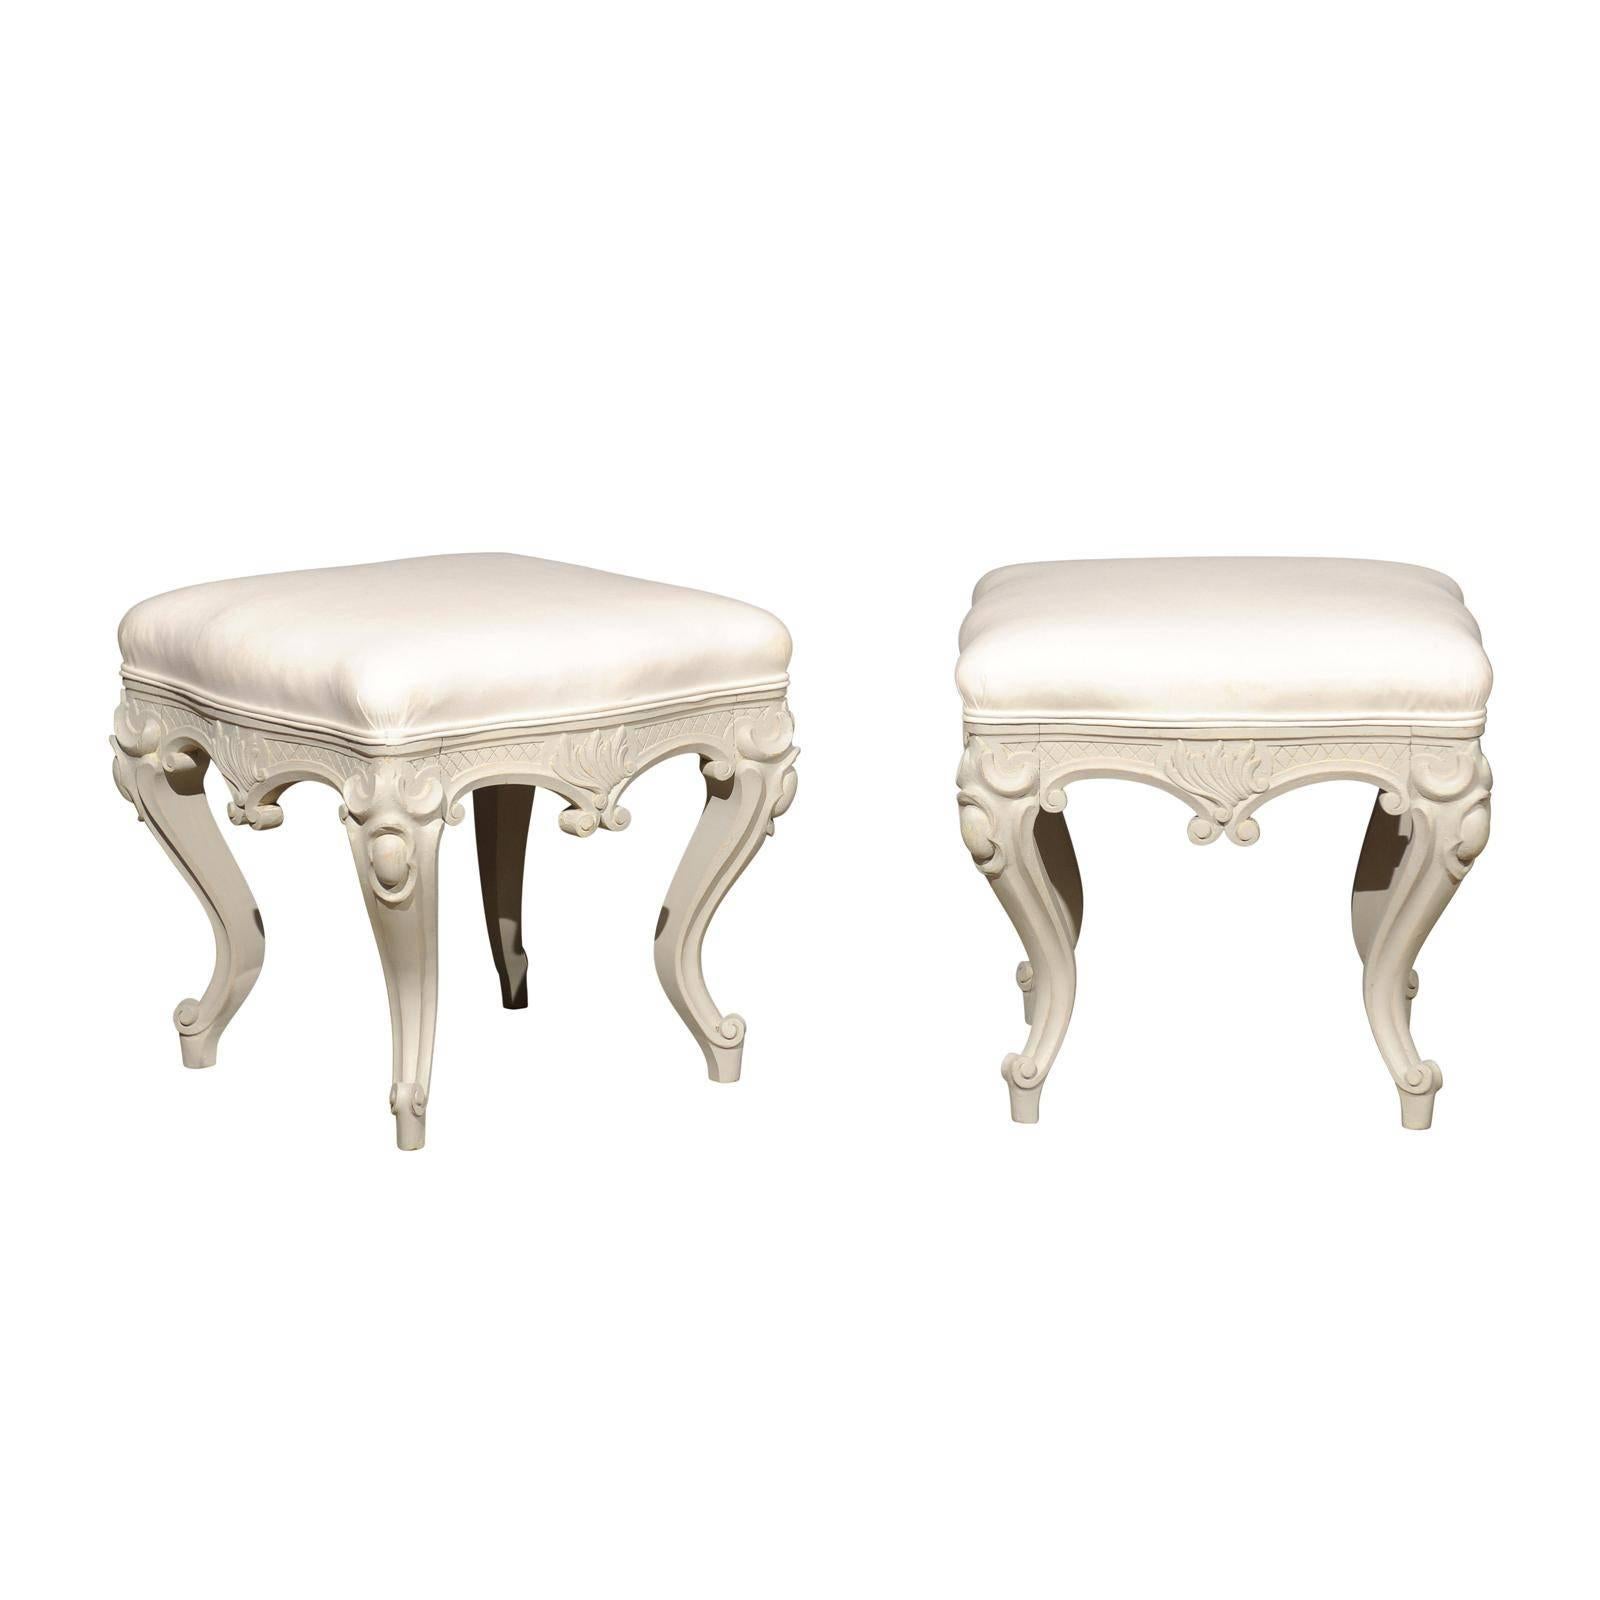 Pair of Swedish Rococo Style Carved Painted Upholstered Stools, circa 1890